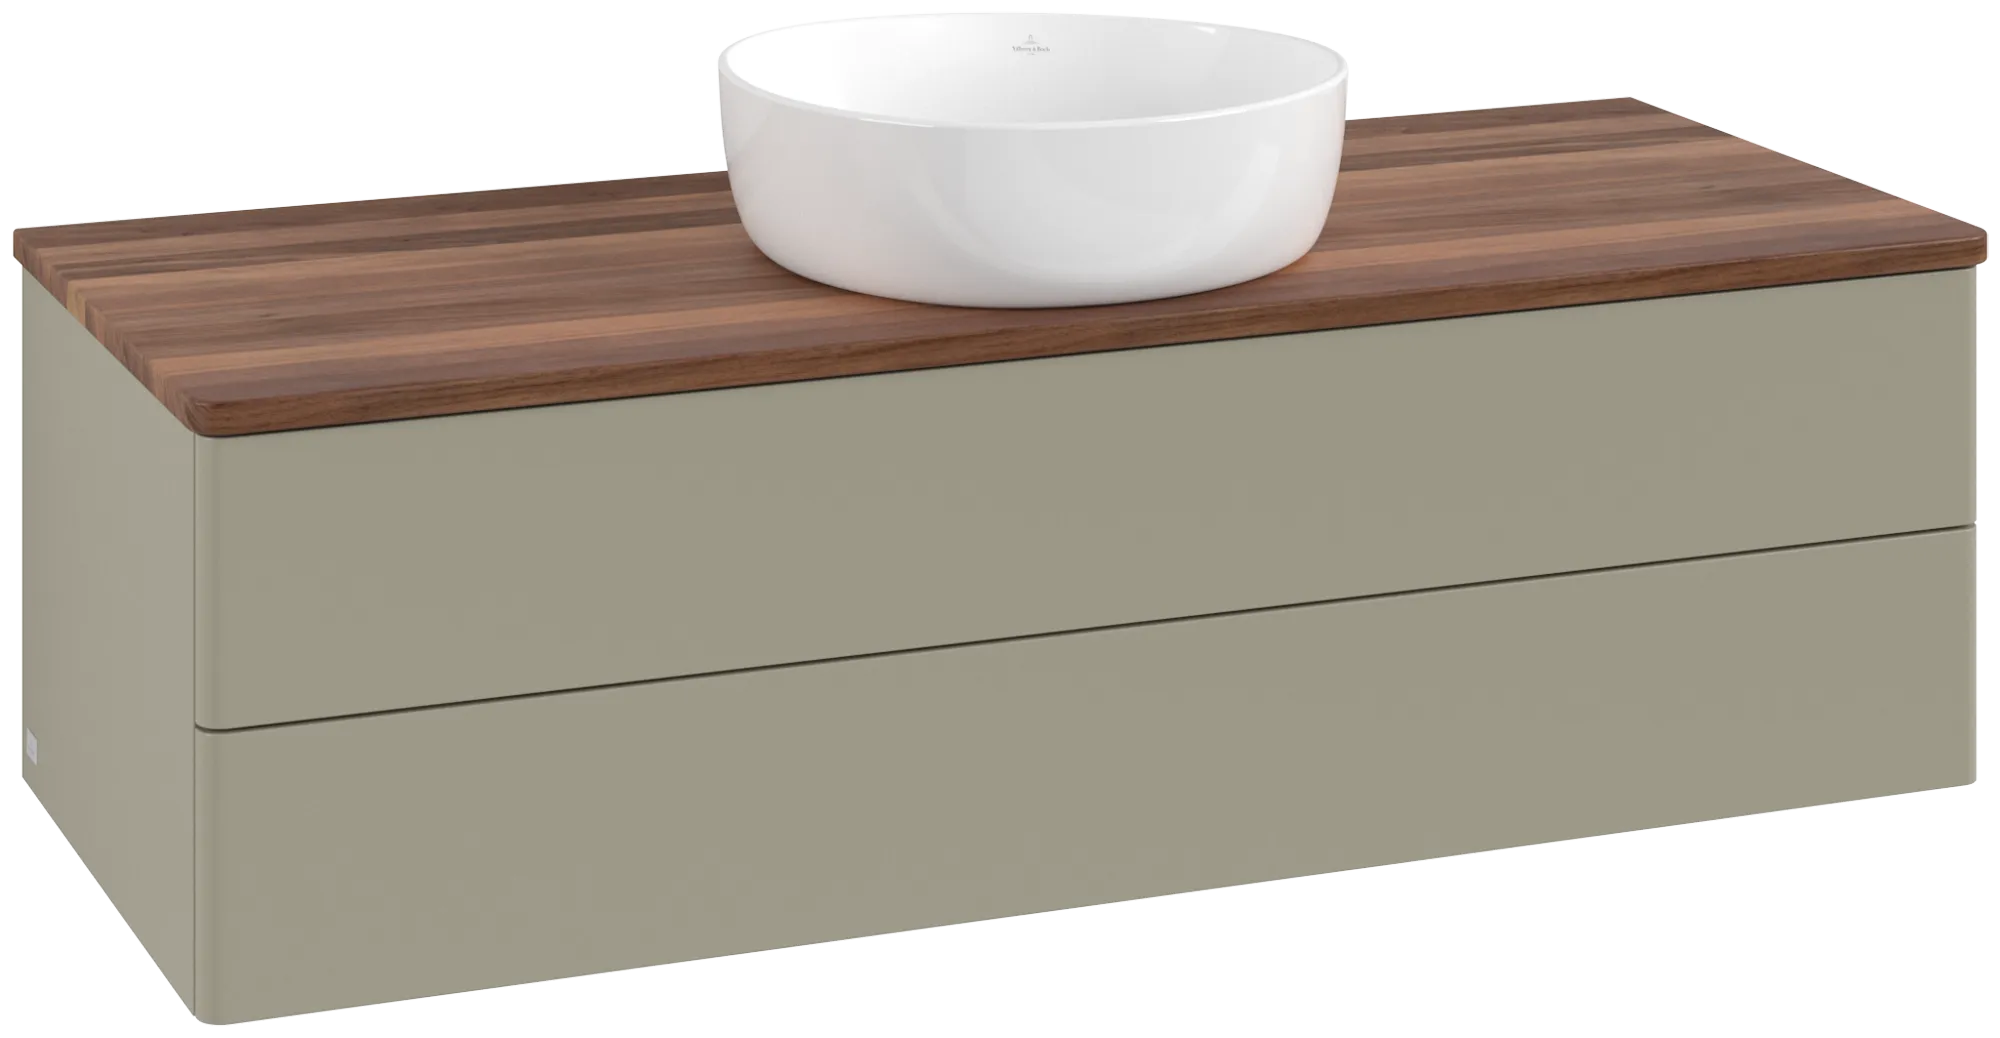 Picture of VILLEROY BOCH Antao Vanity unit, 2 pull-out compartments, 1200 x 360 x 500 mm, Front without structure, Stone Grey Matt Lacquer / Warm Walnut #K21012HK